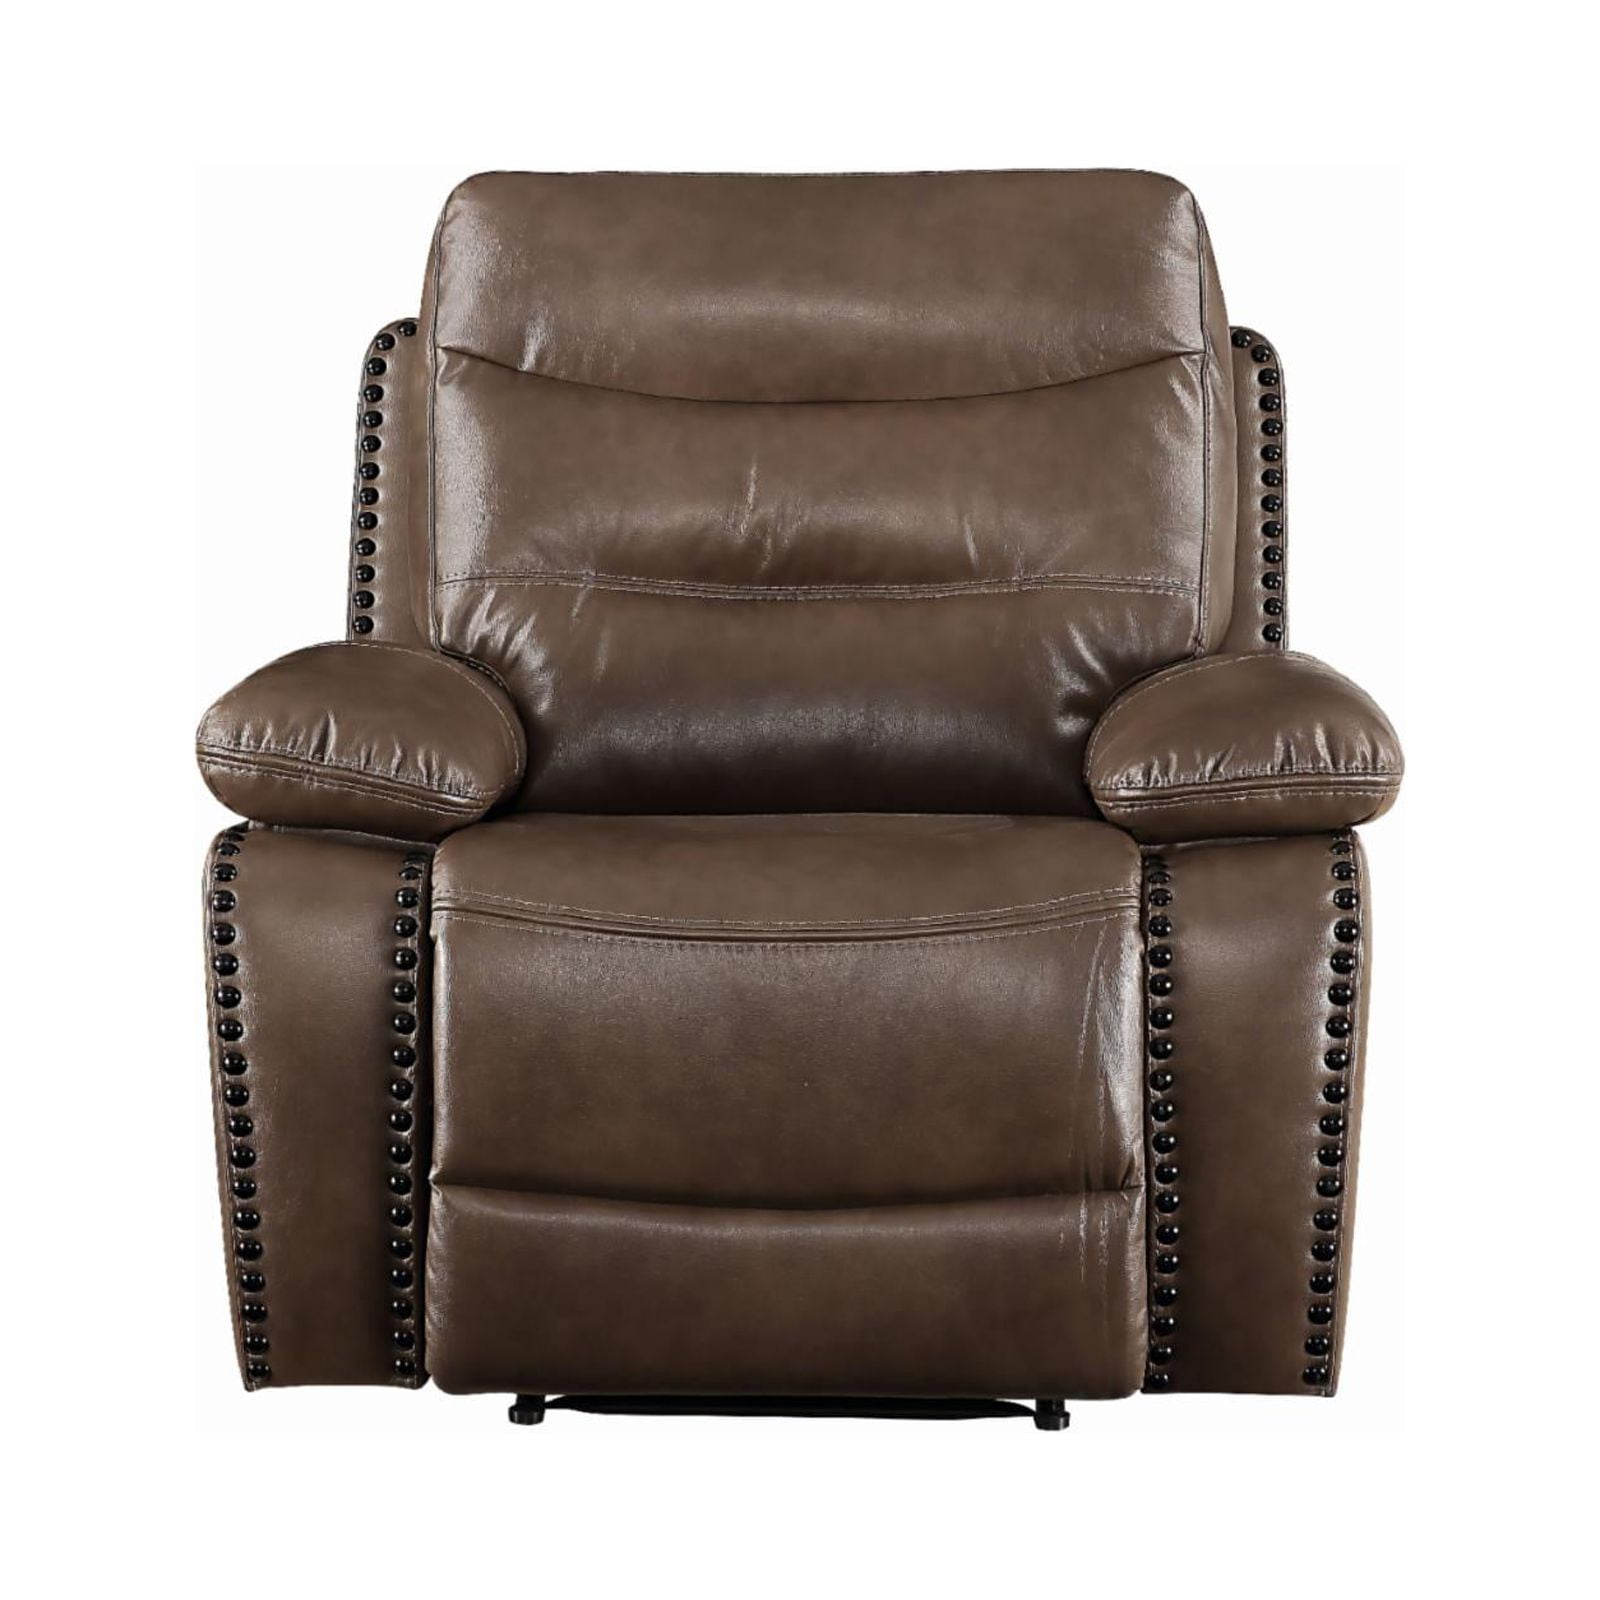 Picture of Acme Furniture 55423 42 x 38 x 41 in. Aashi Recliner, Brown Leather-Gel Match